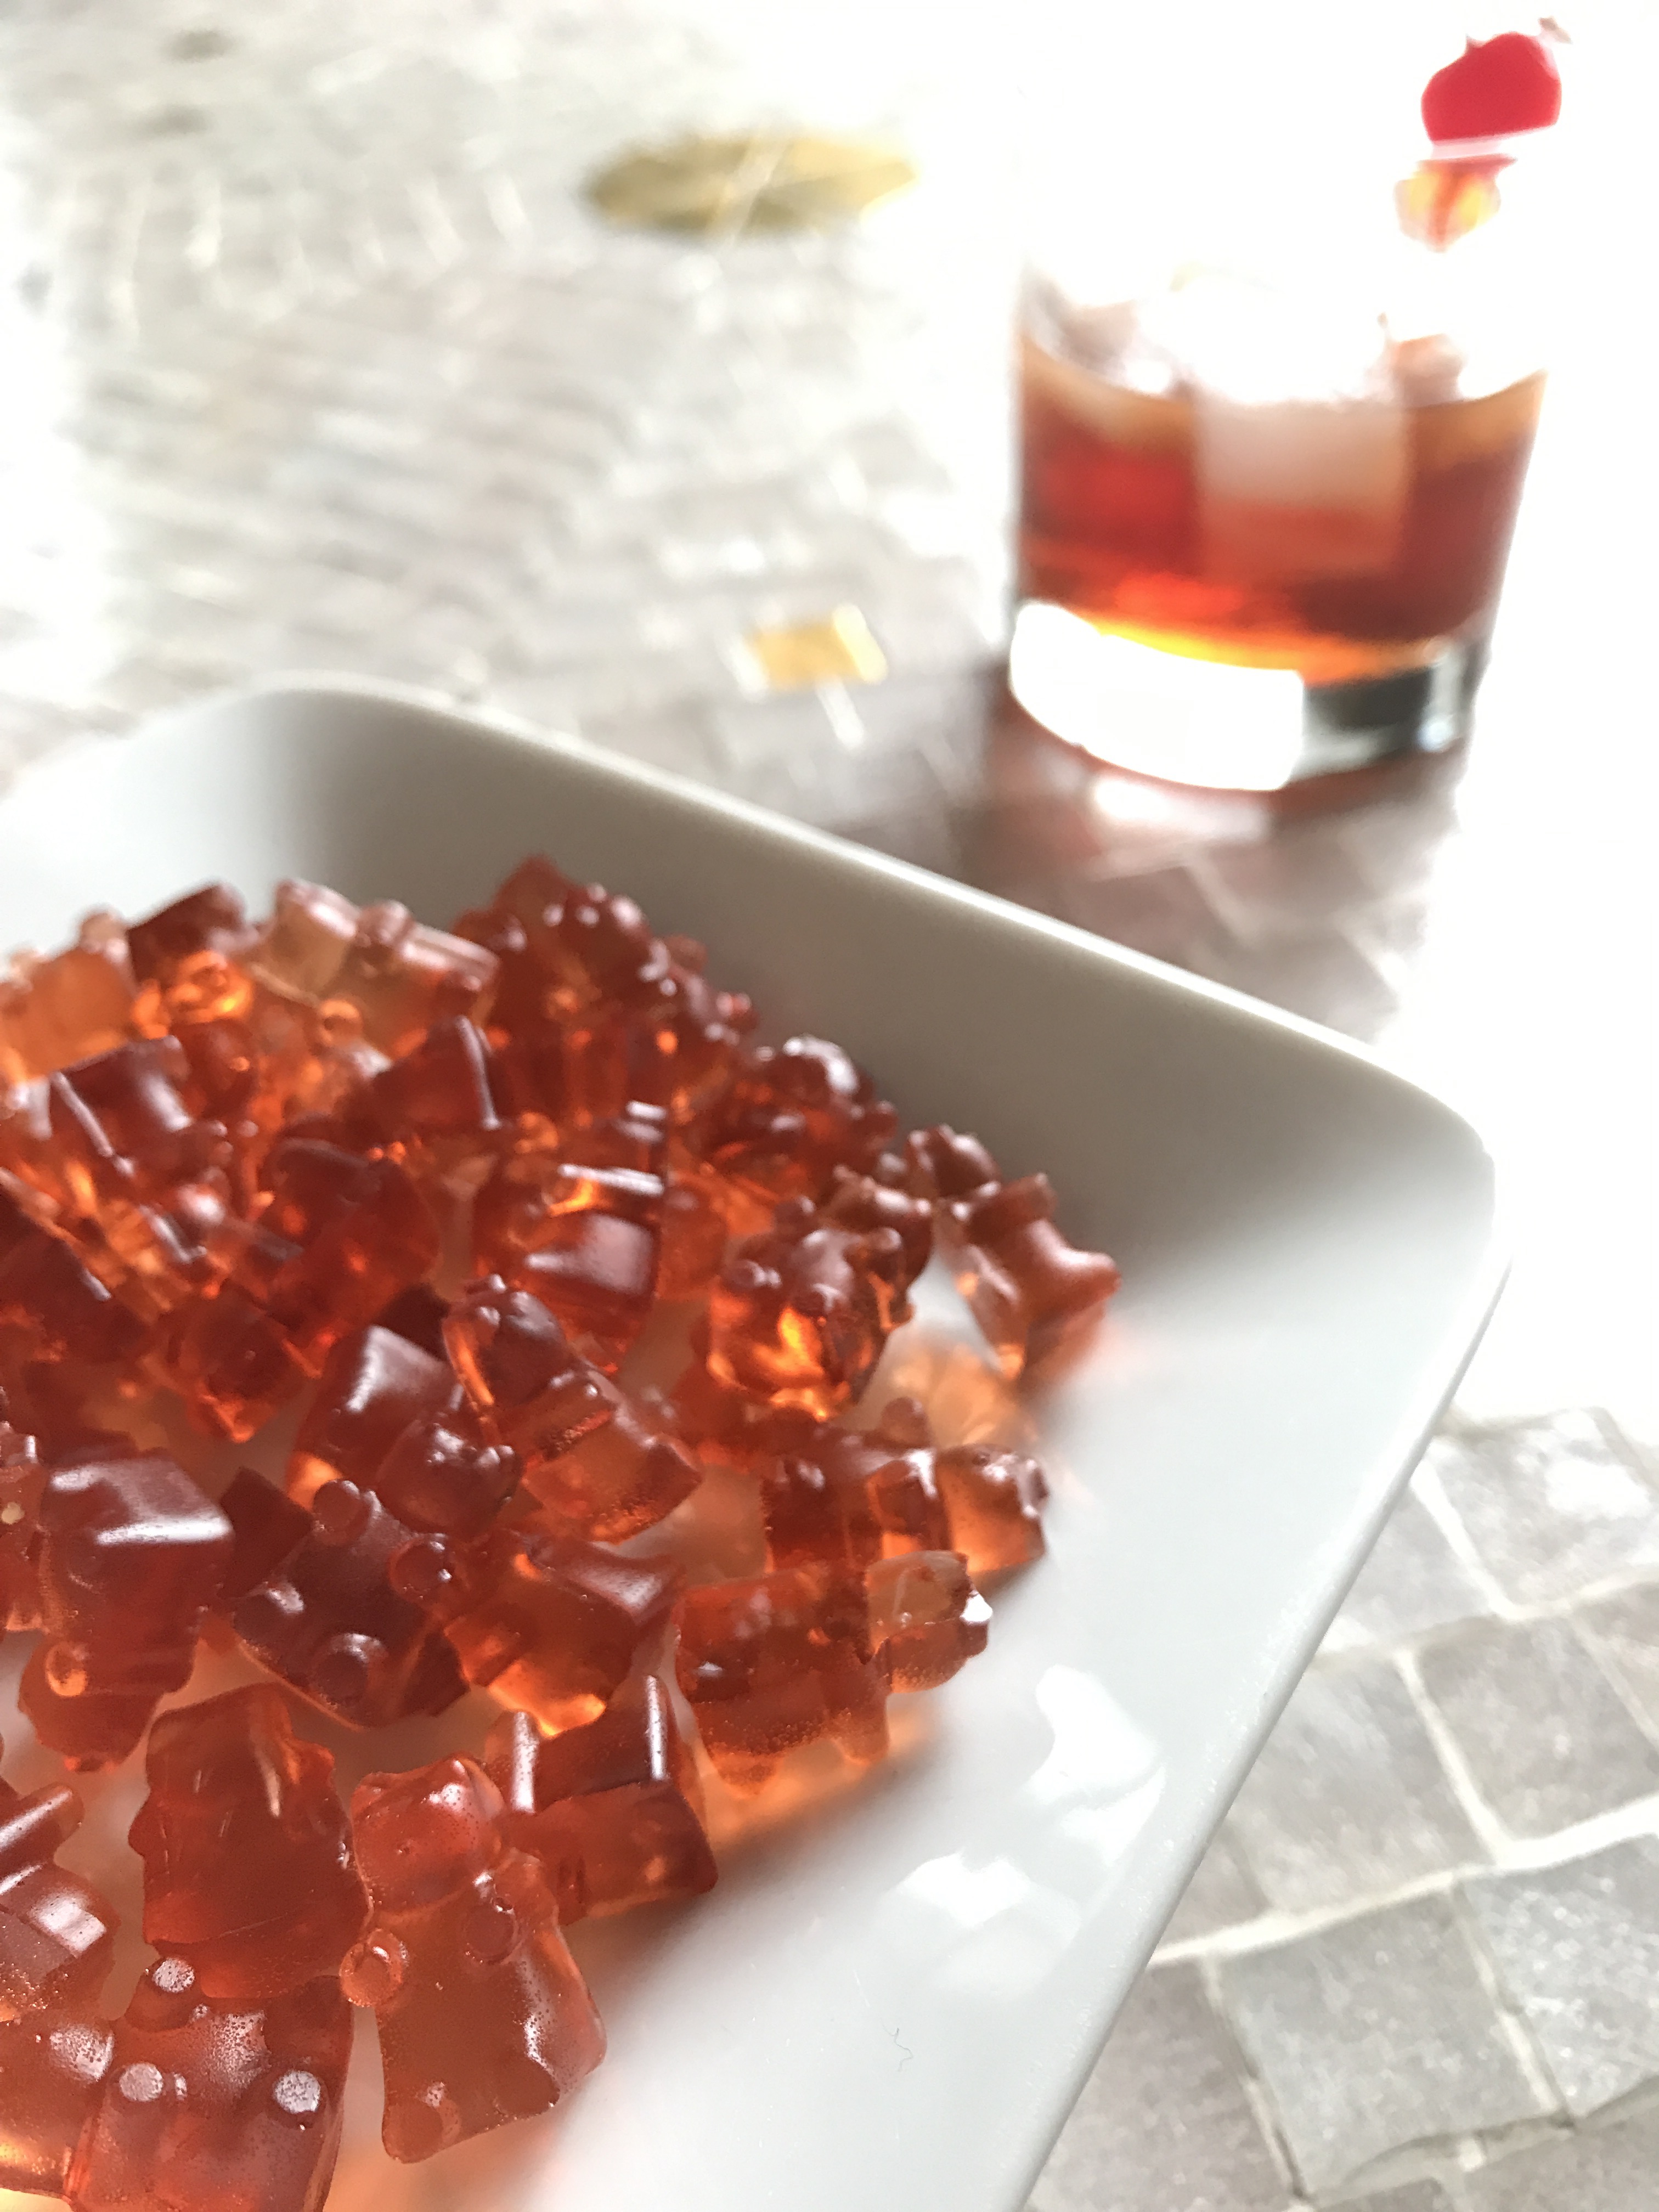 Shop Gummy Molds, Droppers + Flavors for Making Gummies at Home